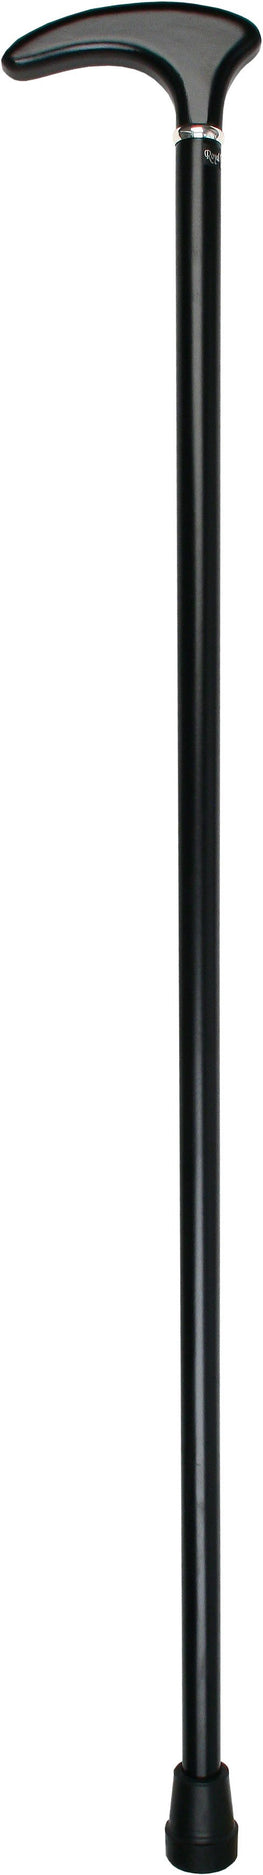 Royal Canes Black Painted Cosmopolitan Walking Cane With Beechwood Shaft and Silver Collar